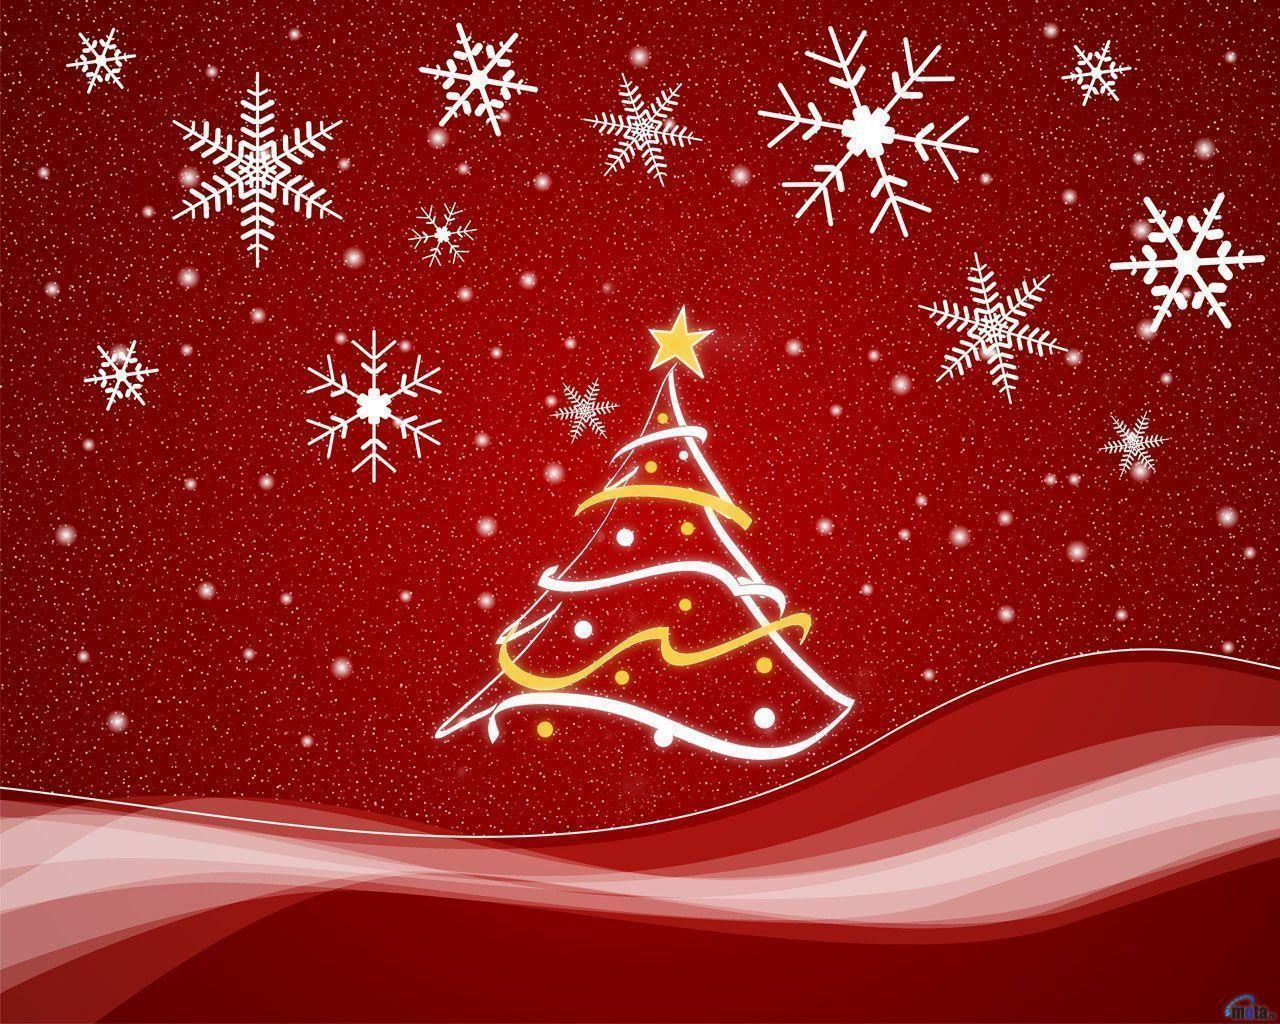 Christmas Wallpaper Free Tree Snow On Red Background 1280x1024PX